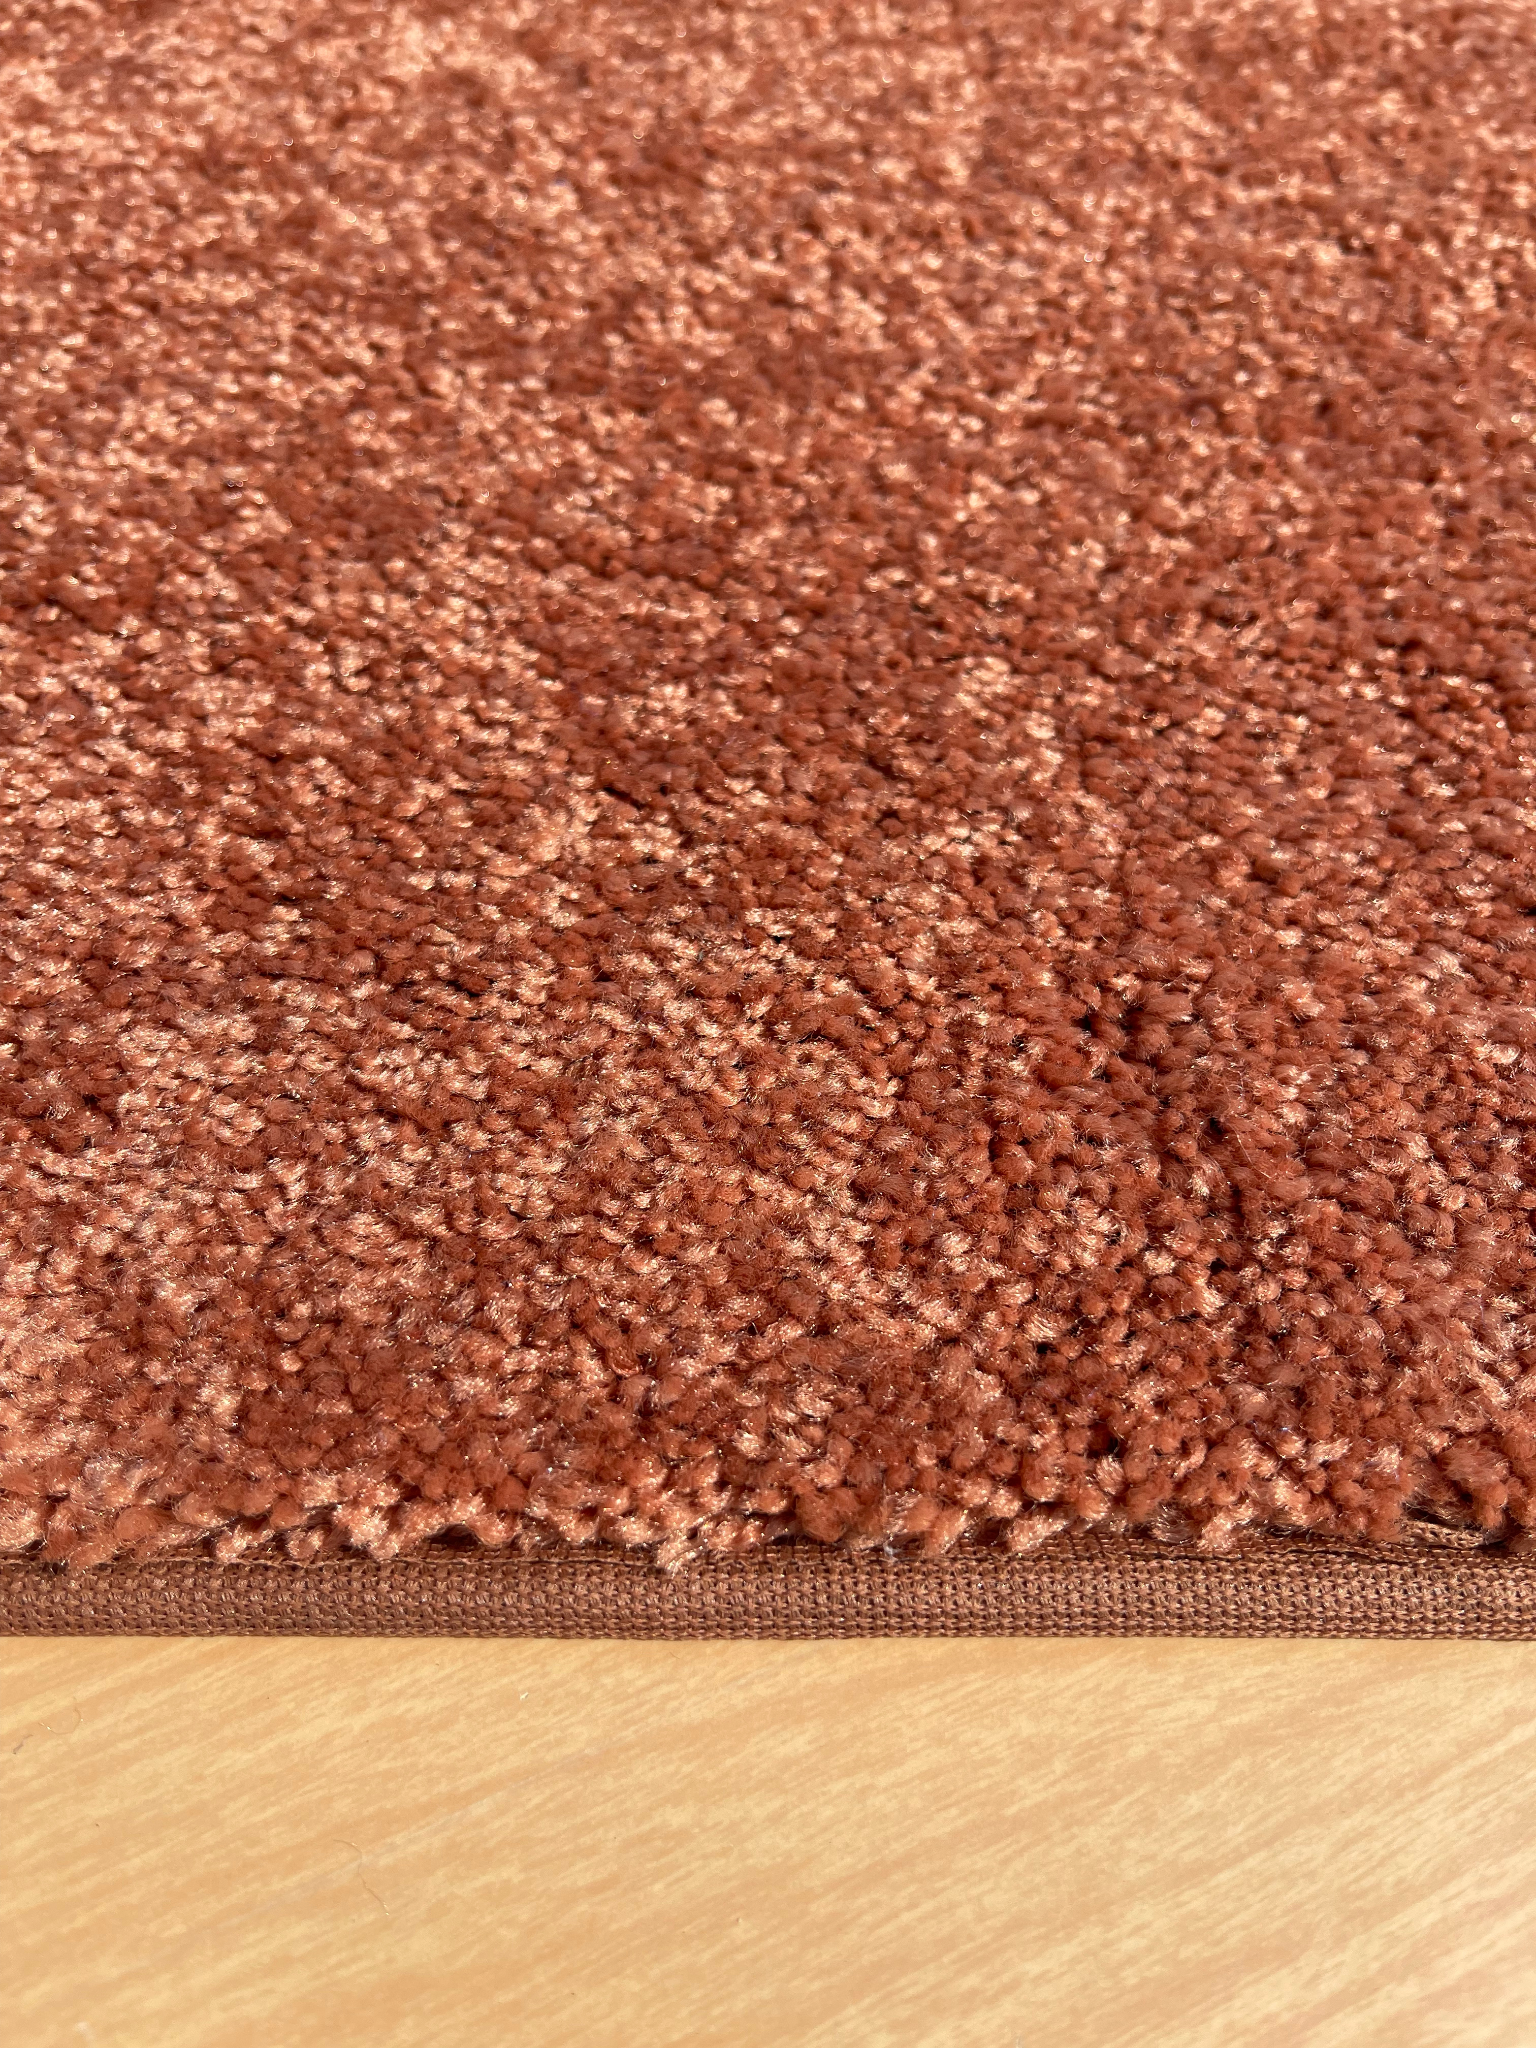 Copper Penny Area Rug side view in living room